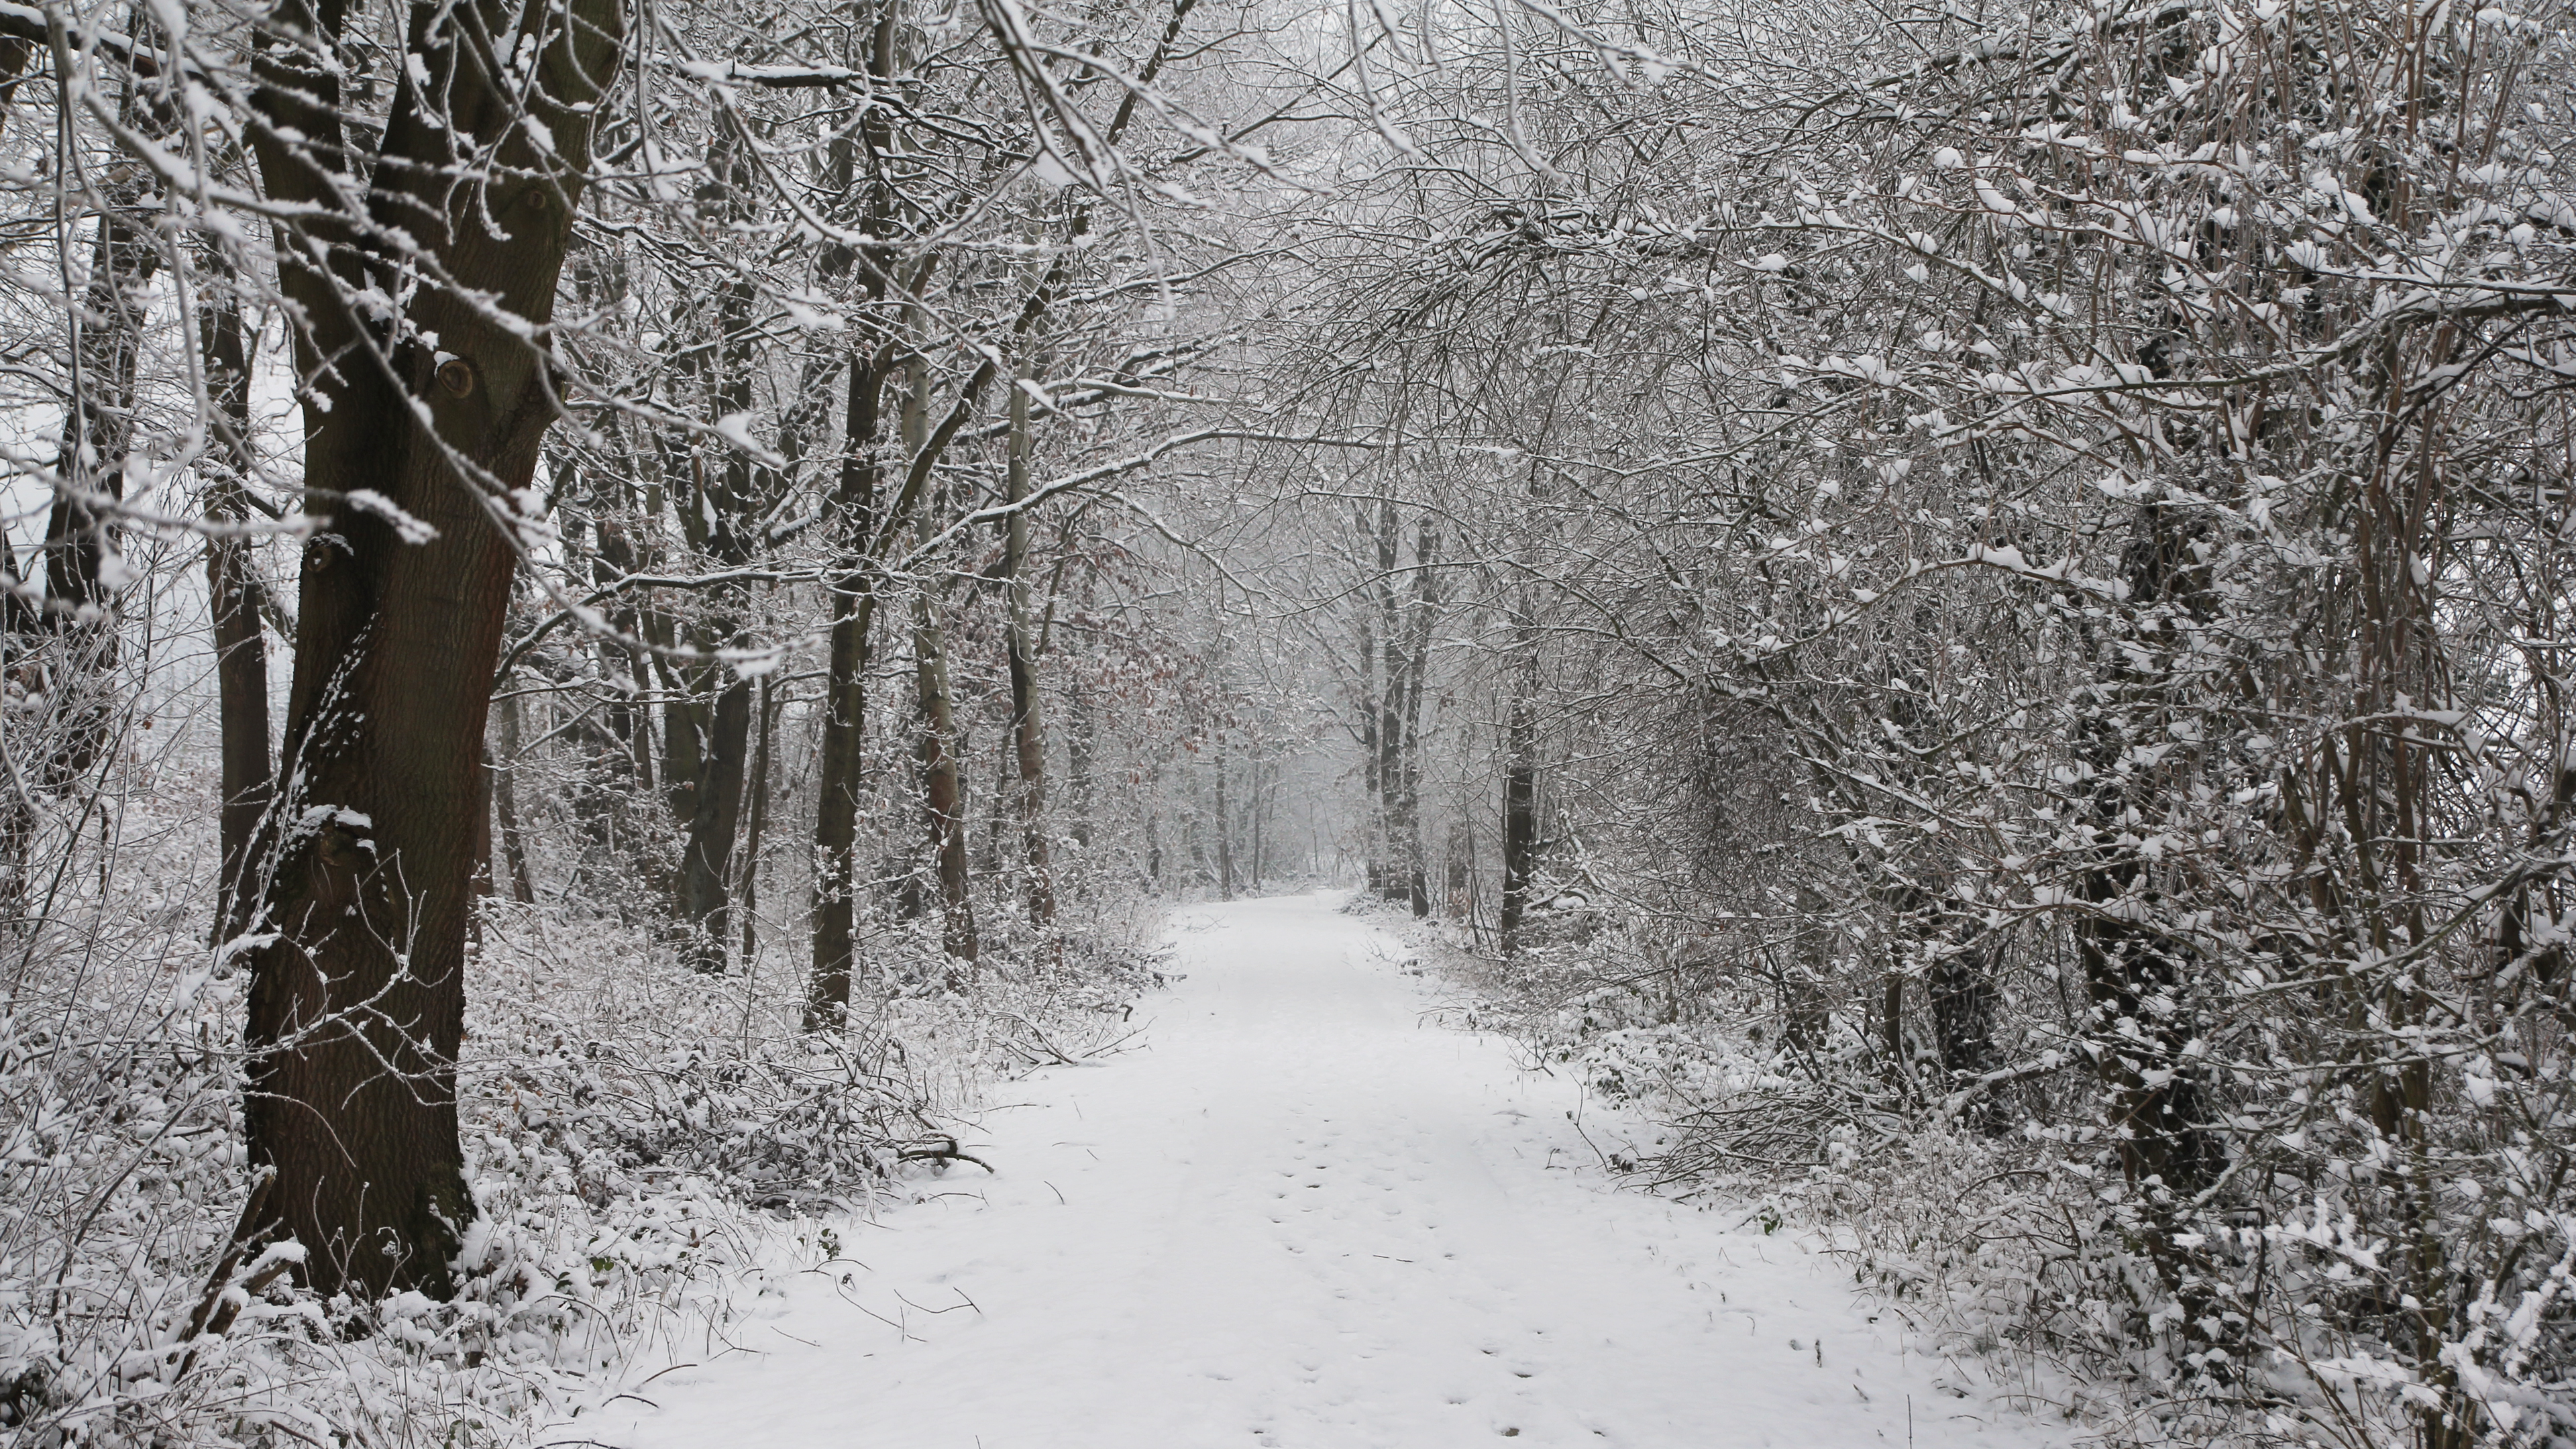 General 3840x2160 snow nature forest trees path winter